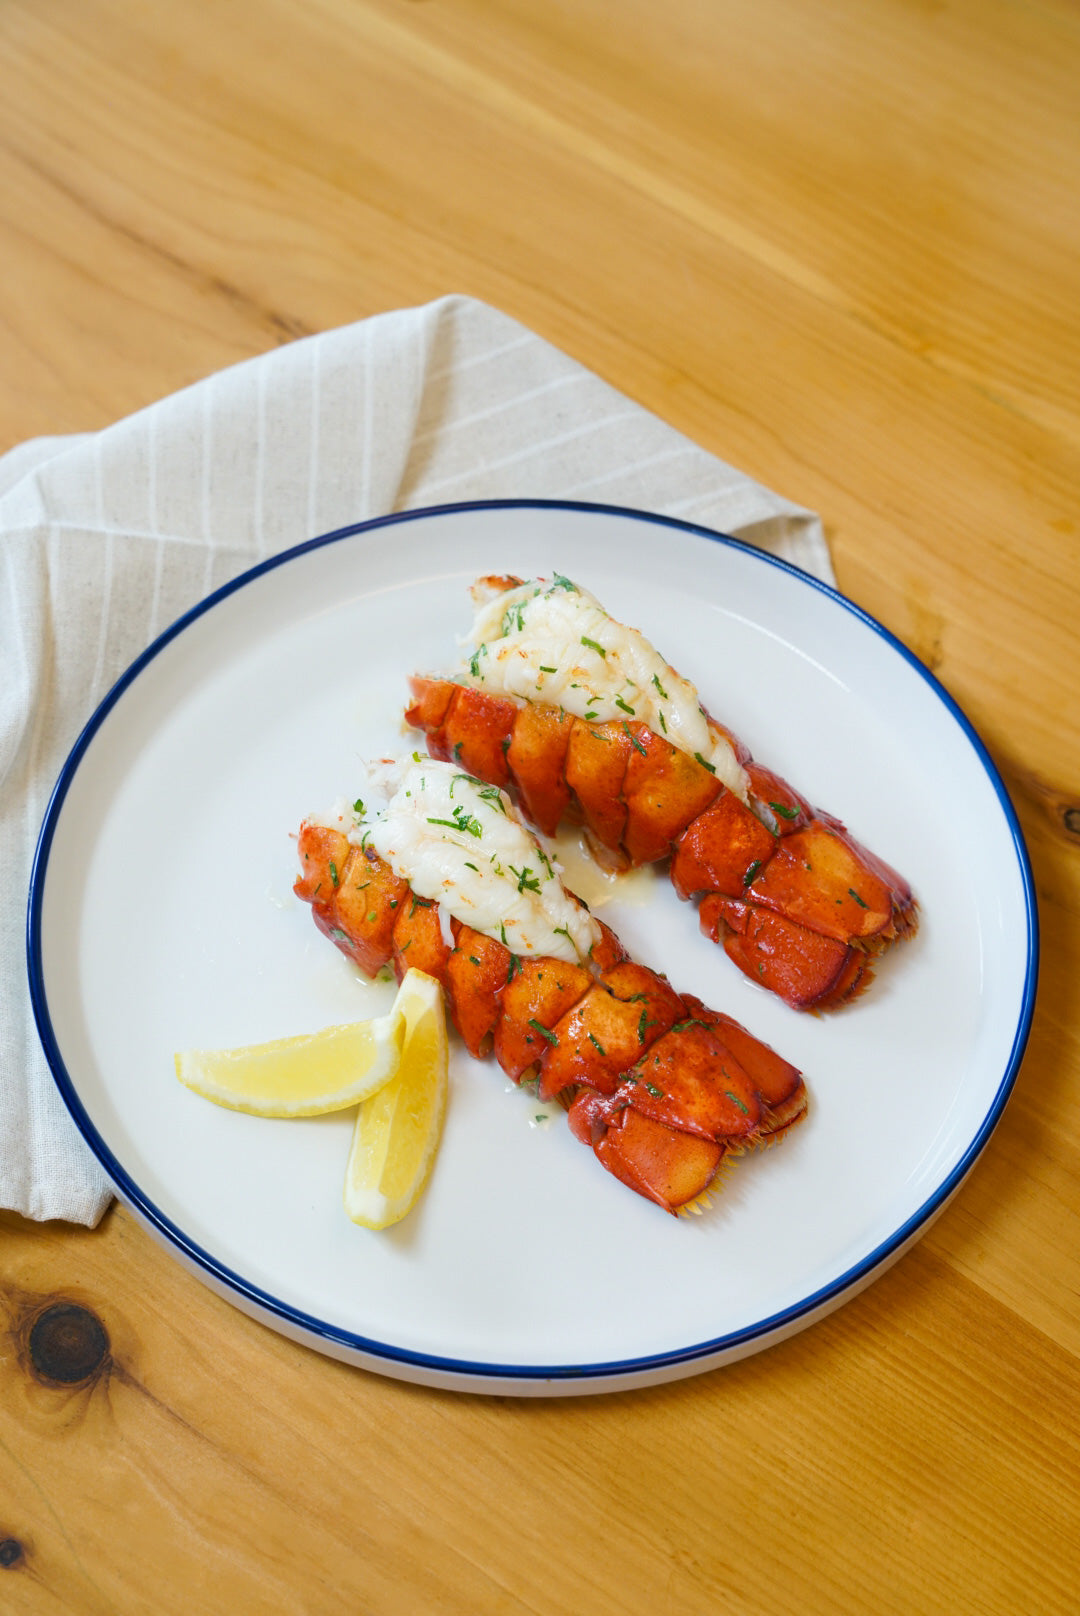 Maine Lobster Tail - 4-5 oz